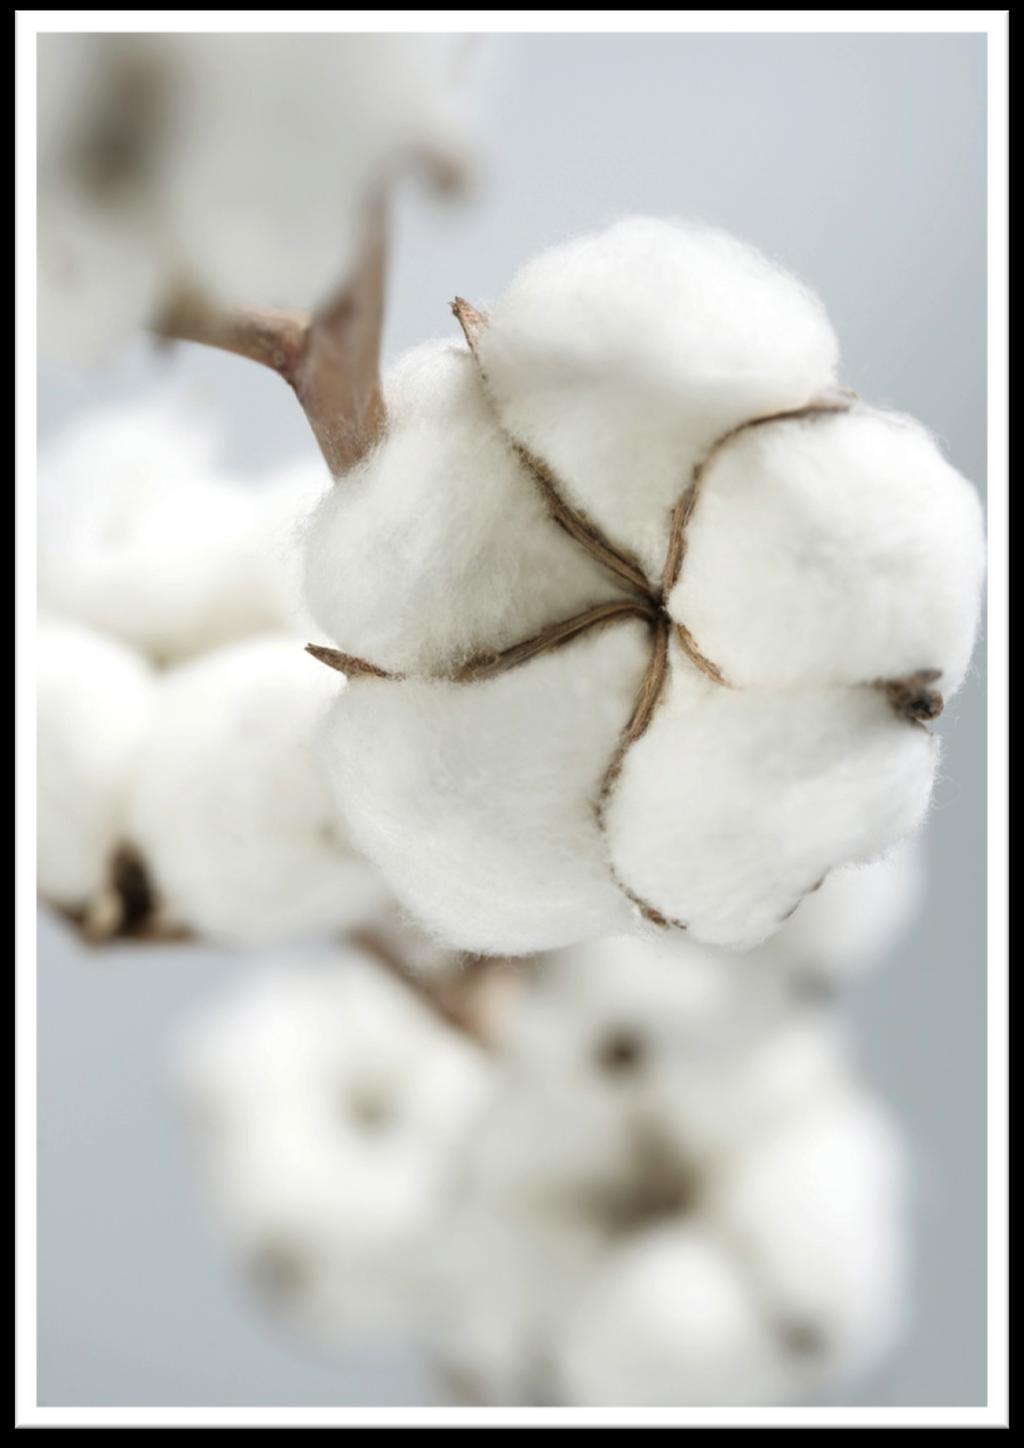 ORGANIC COTTON Cotton is one of the products that everybody uses. Every day people sleep under cotton sheets, they wear cotton shirts and even the food they eat has been made with the help of cotton.